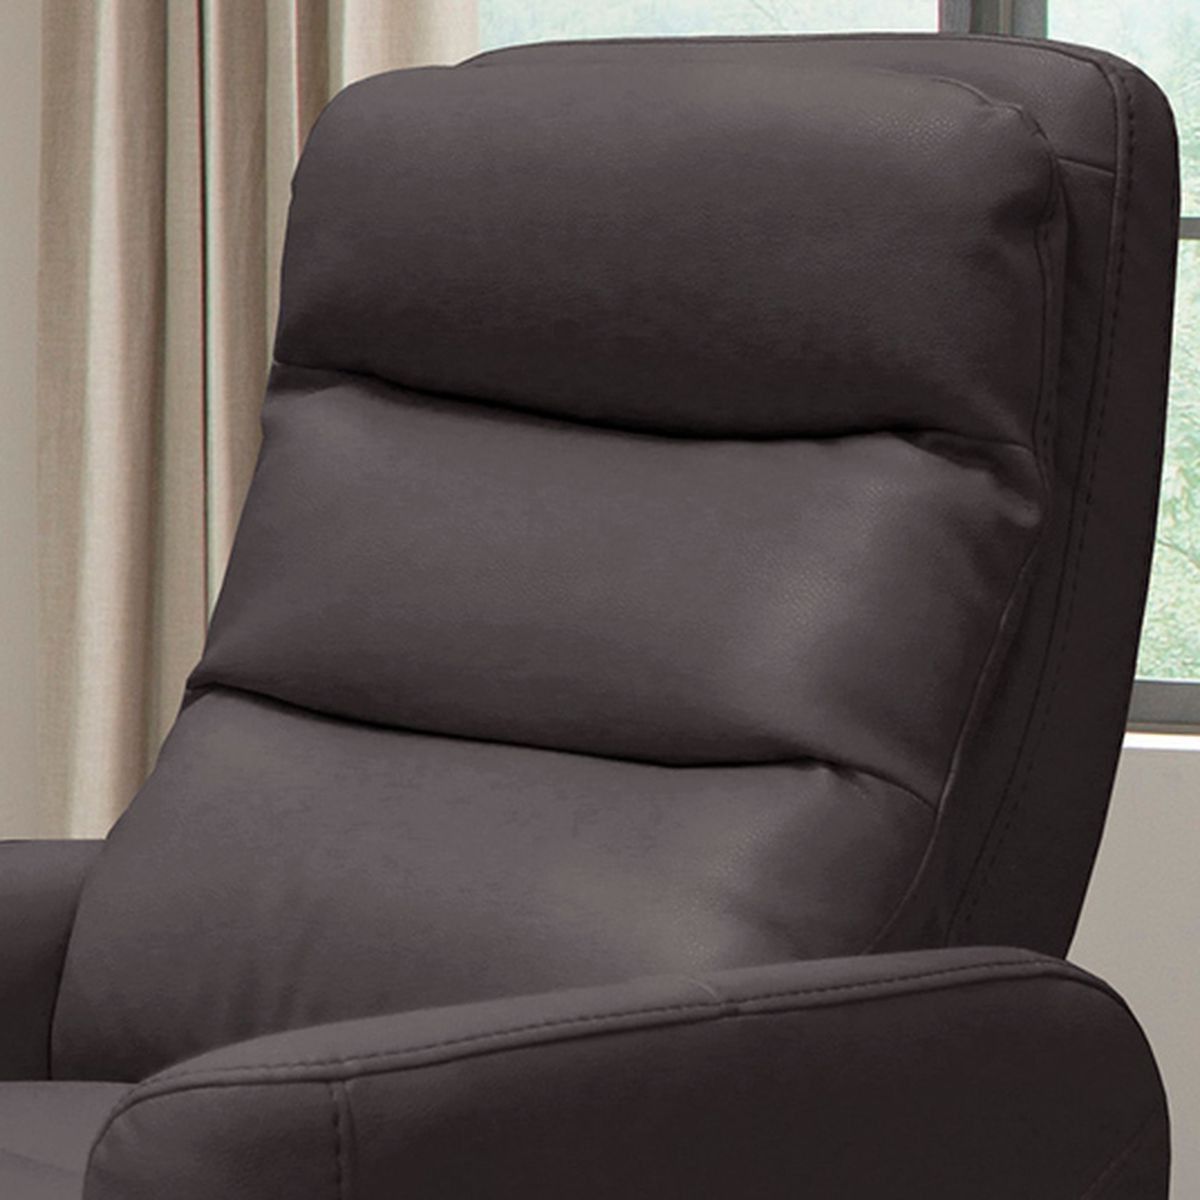 2019 Parker Living Hercules Glider Swivel Recliner With Articulating Intended For Hercules Chocolate Swivel Glider Recliners (View 6 of 20)